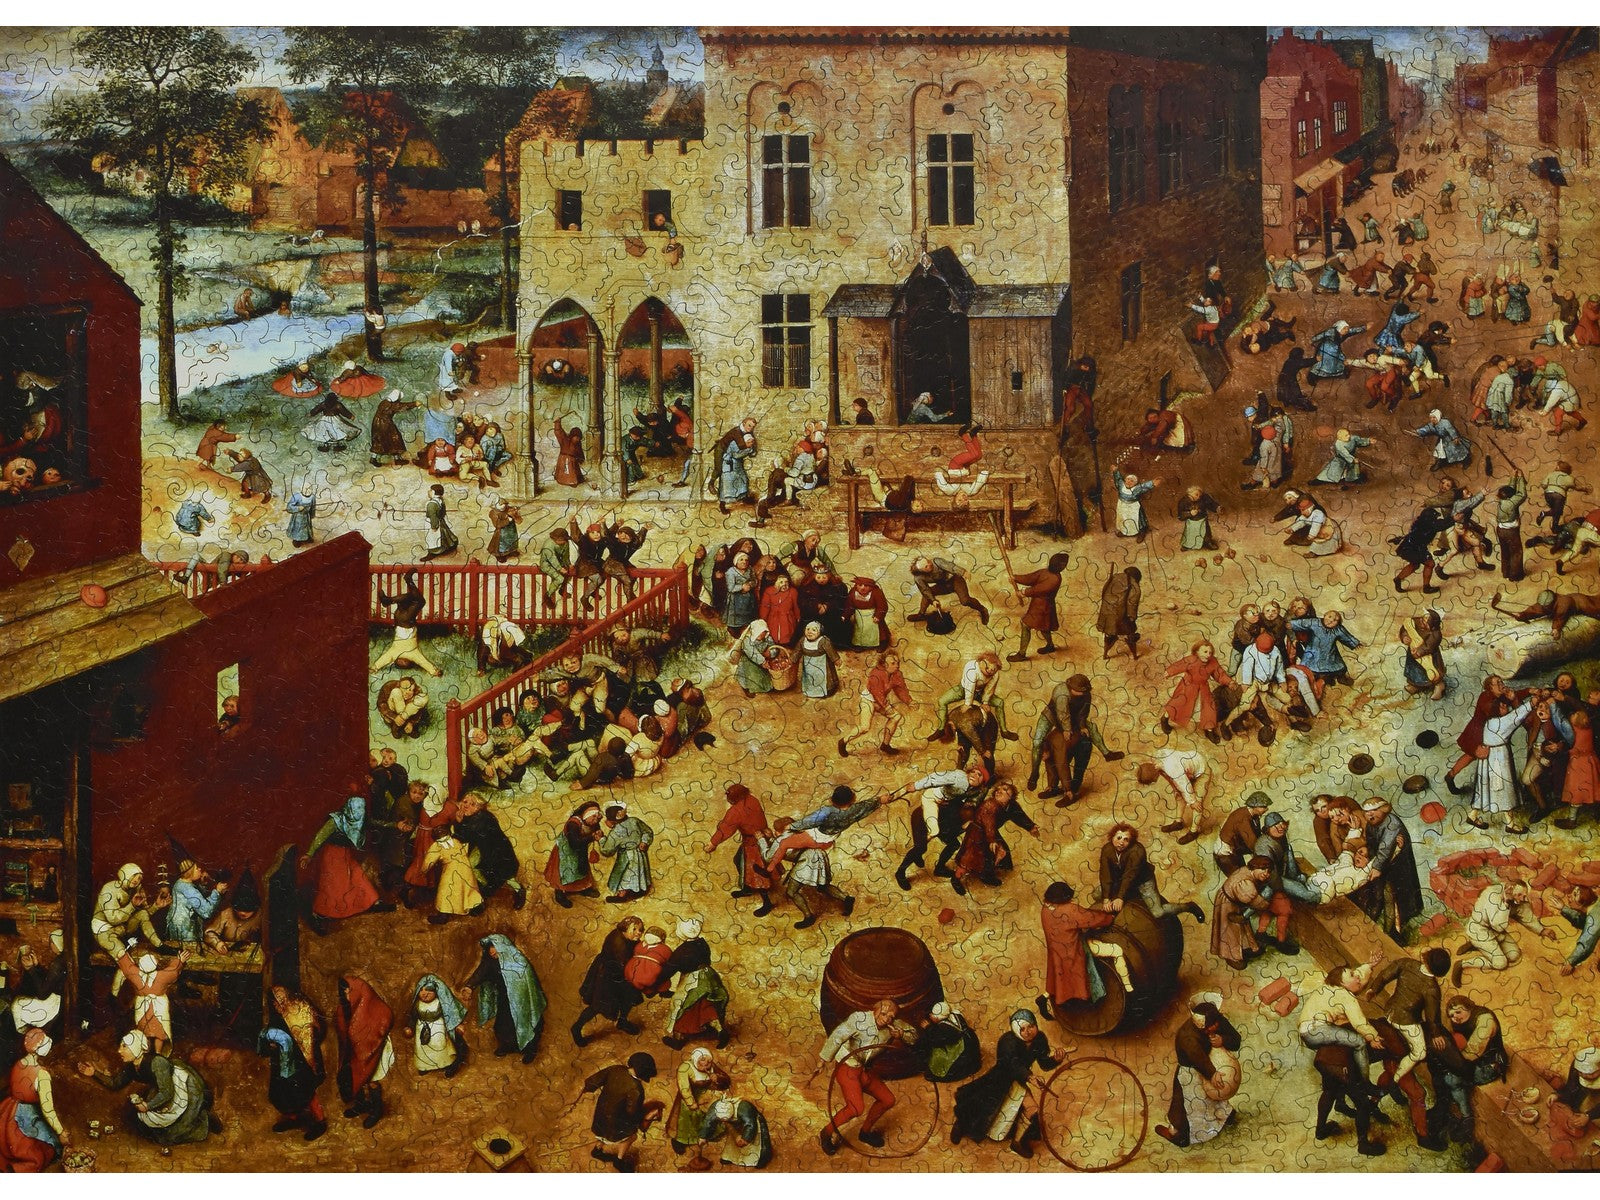 The front of the puzzle, Children's Games, which shows a medieval town square full of children playing different games.